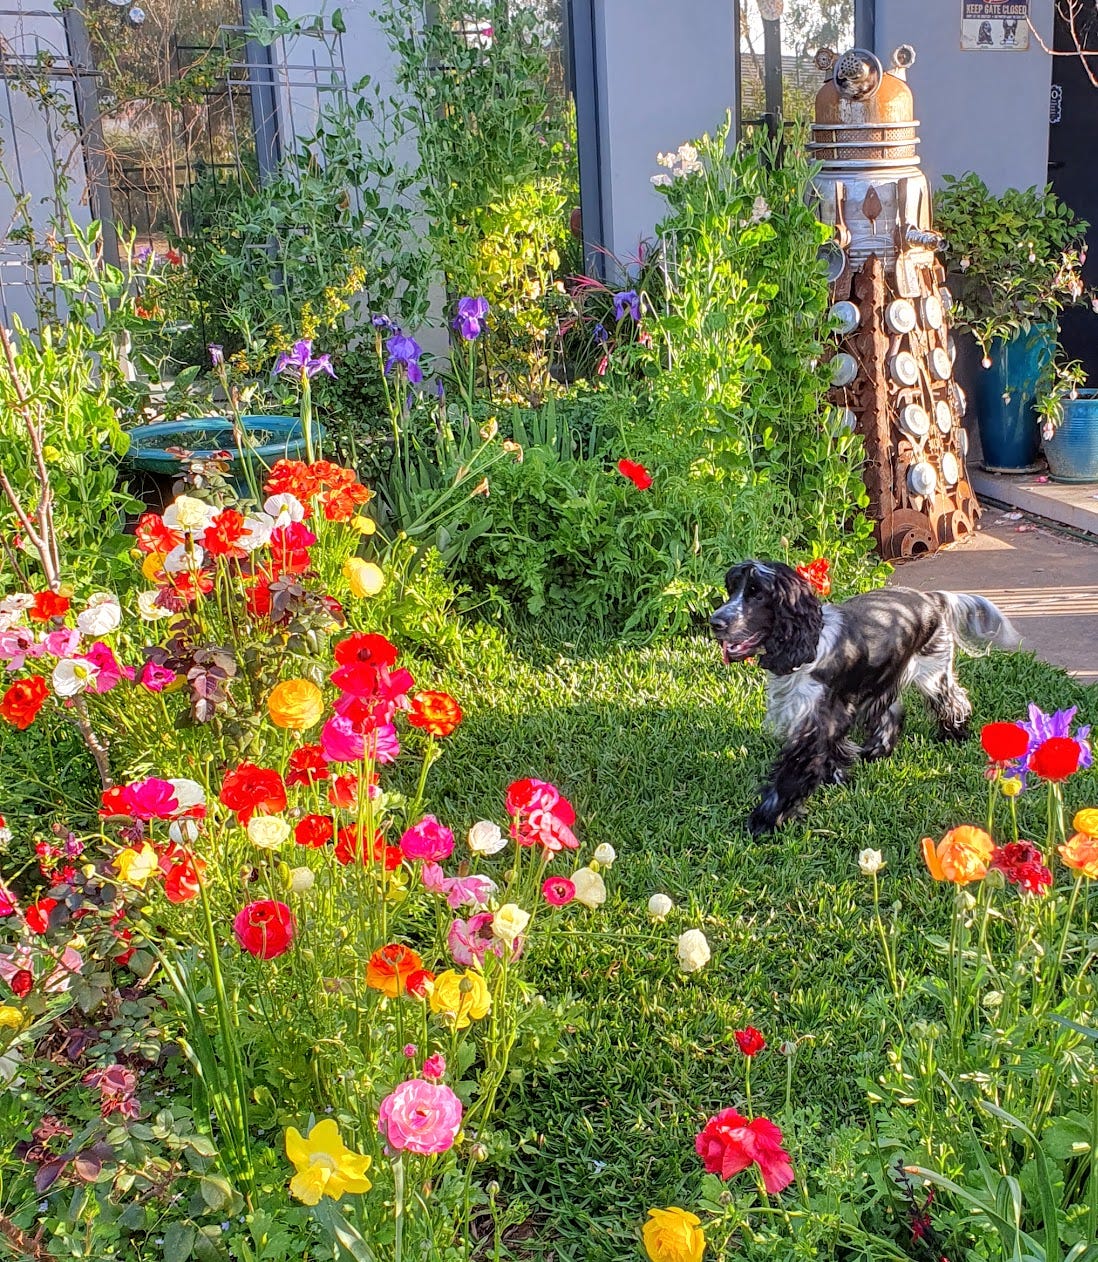 A colourful garden with a black and white Cocker Spaniel and a Dalek sculpture.